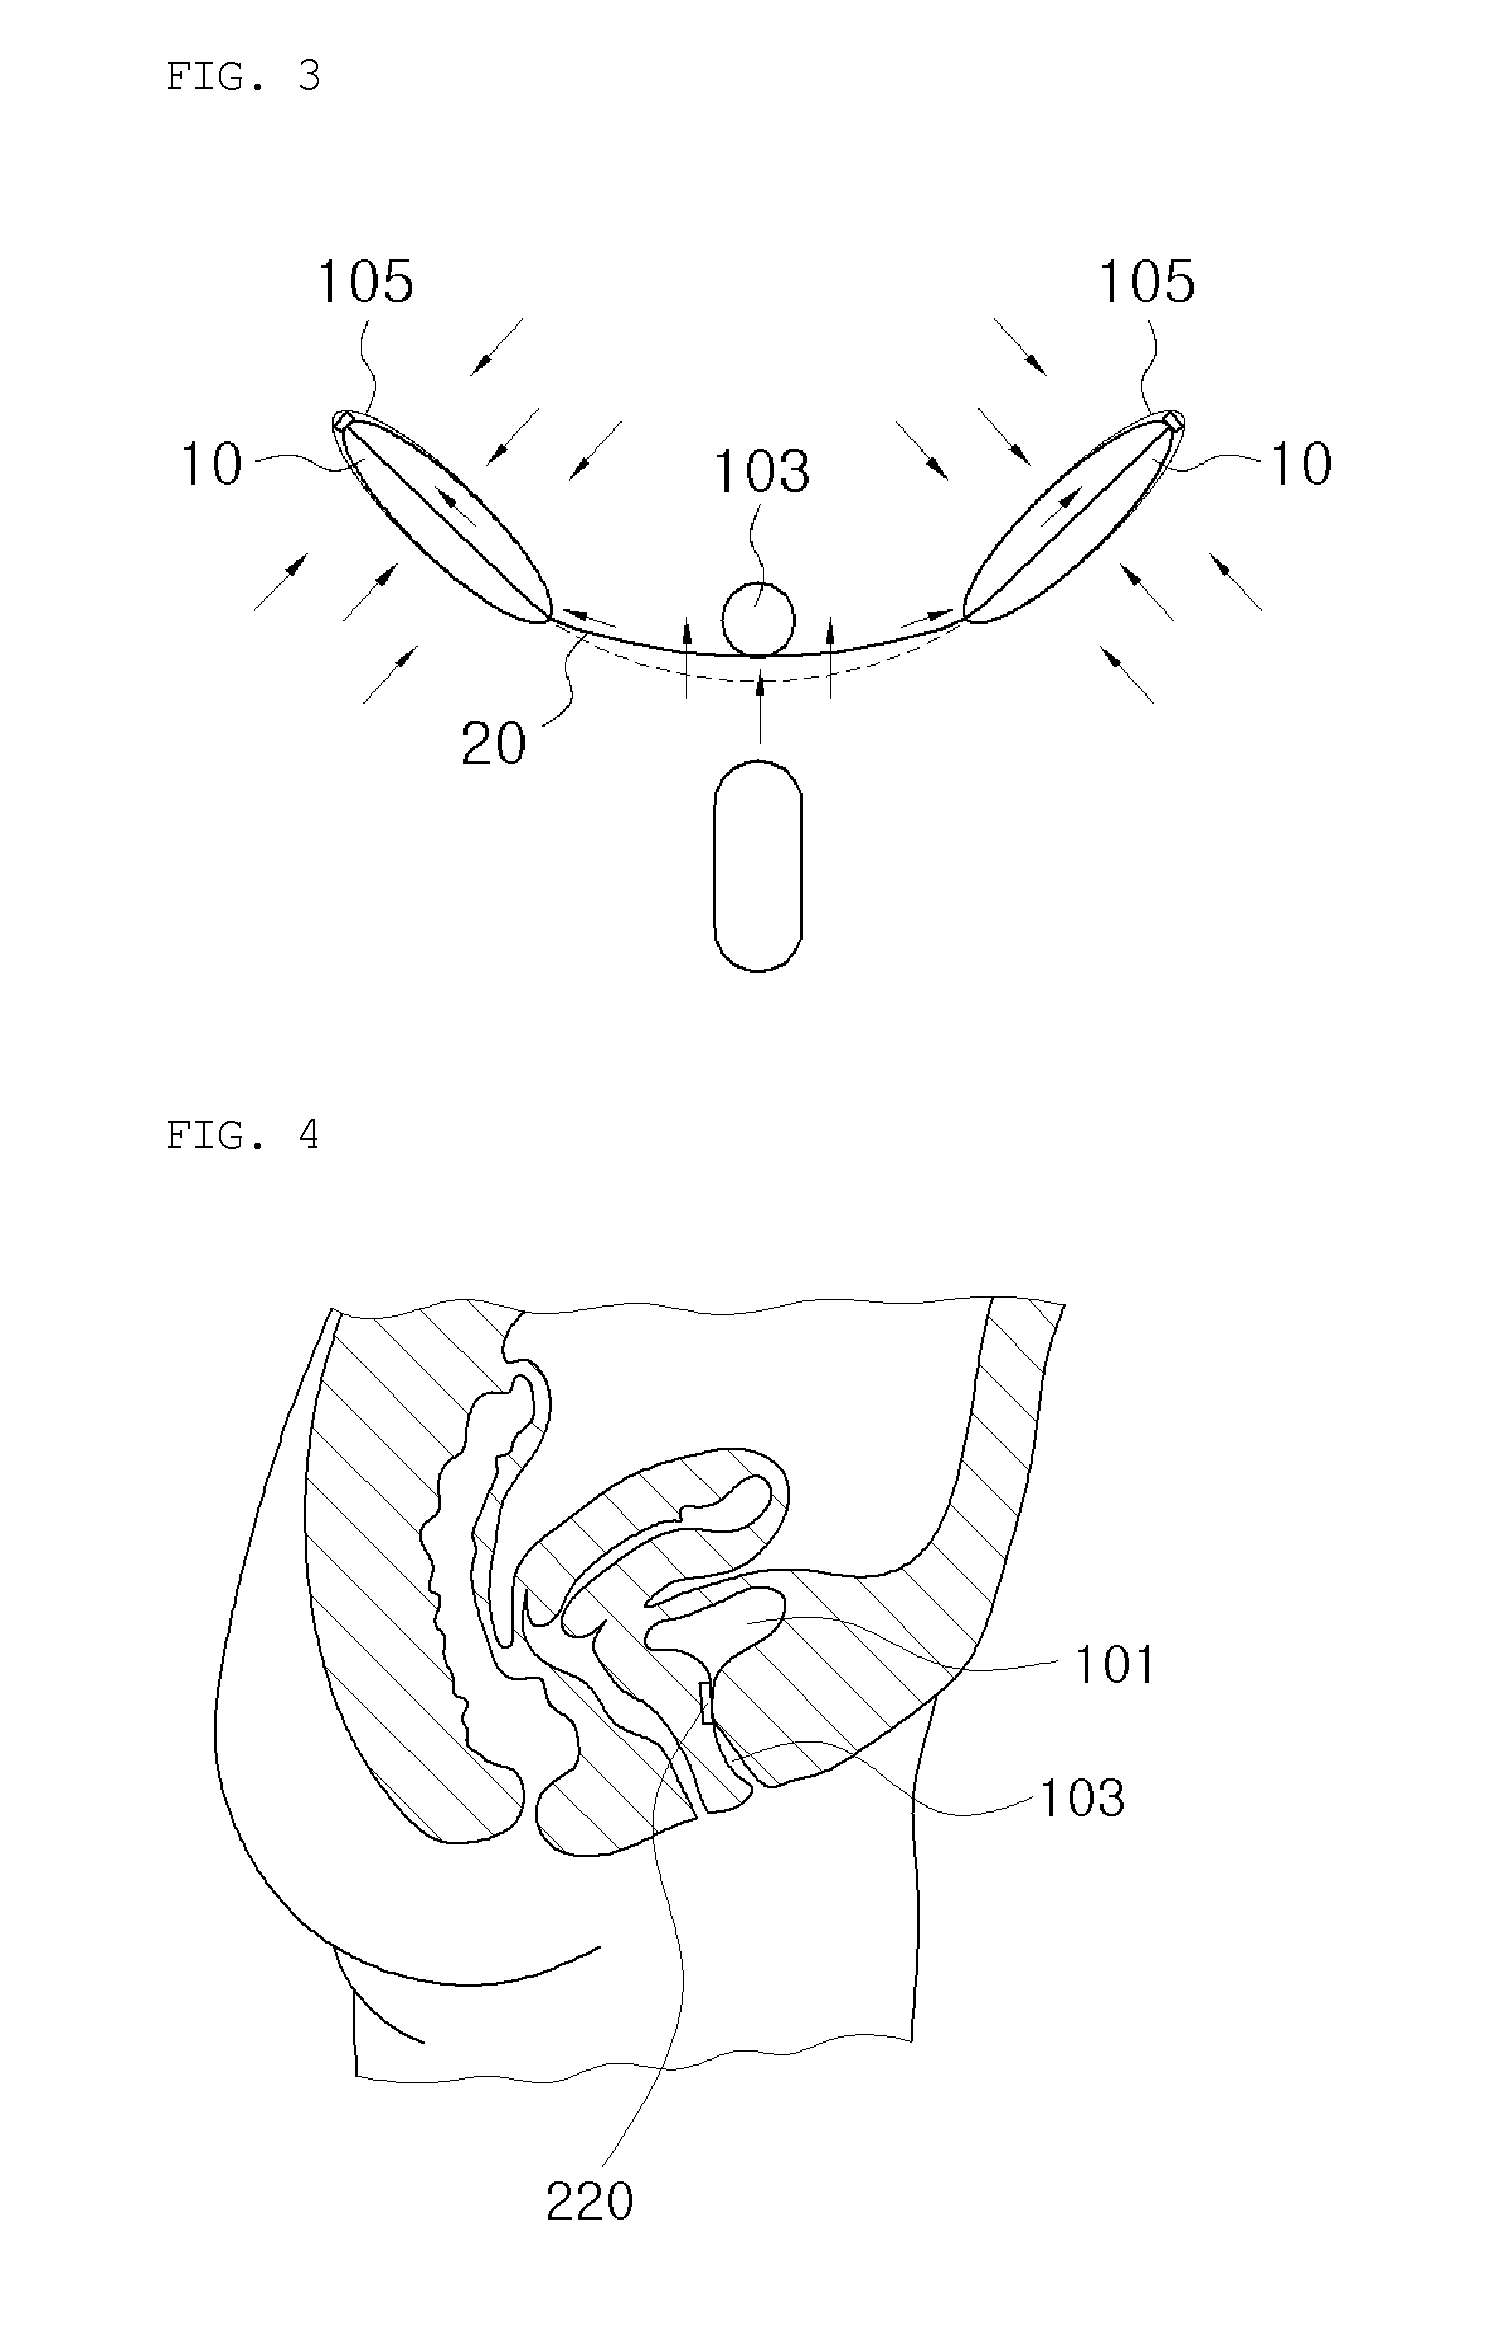 Pressure-to-tension conversion device for treating urinary incontinence